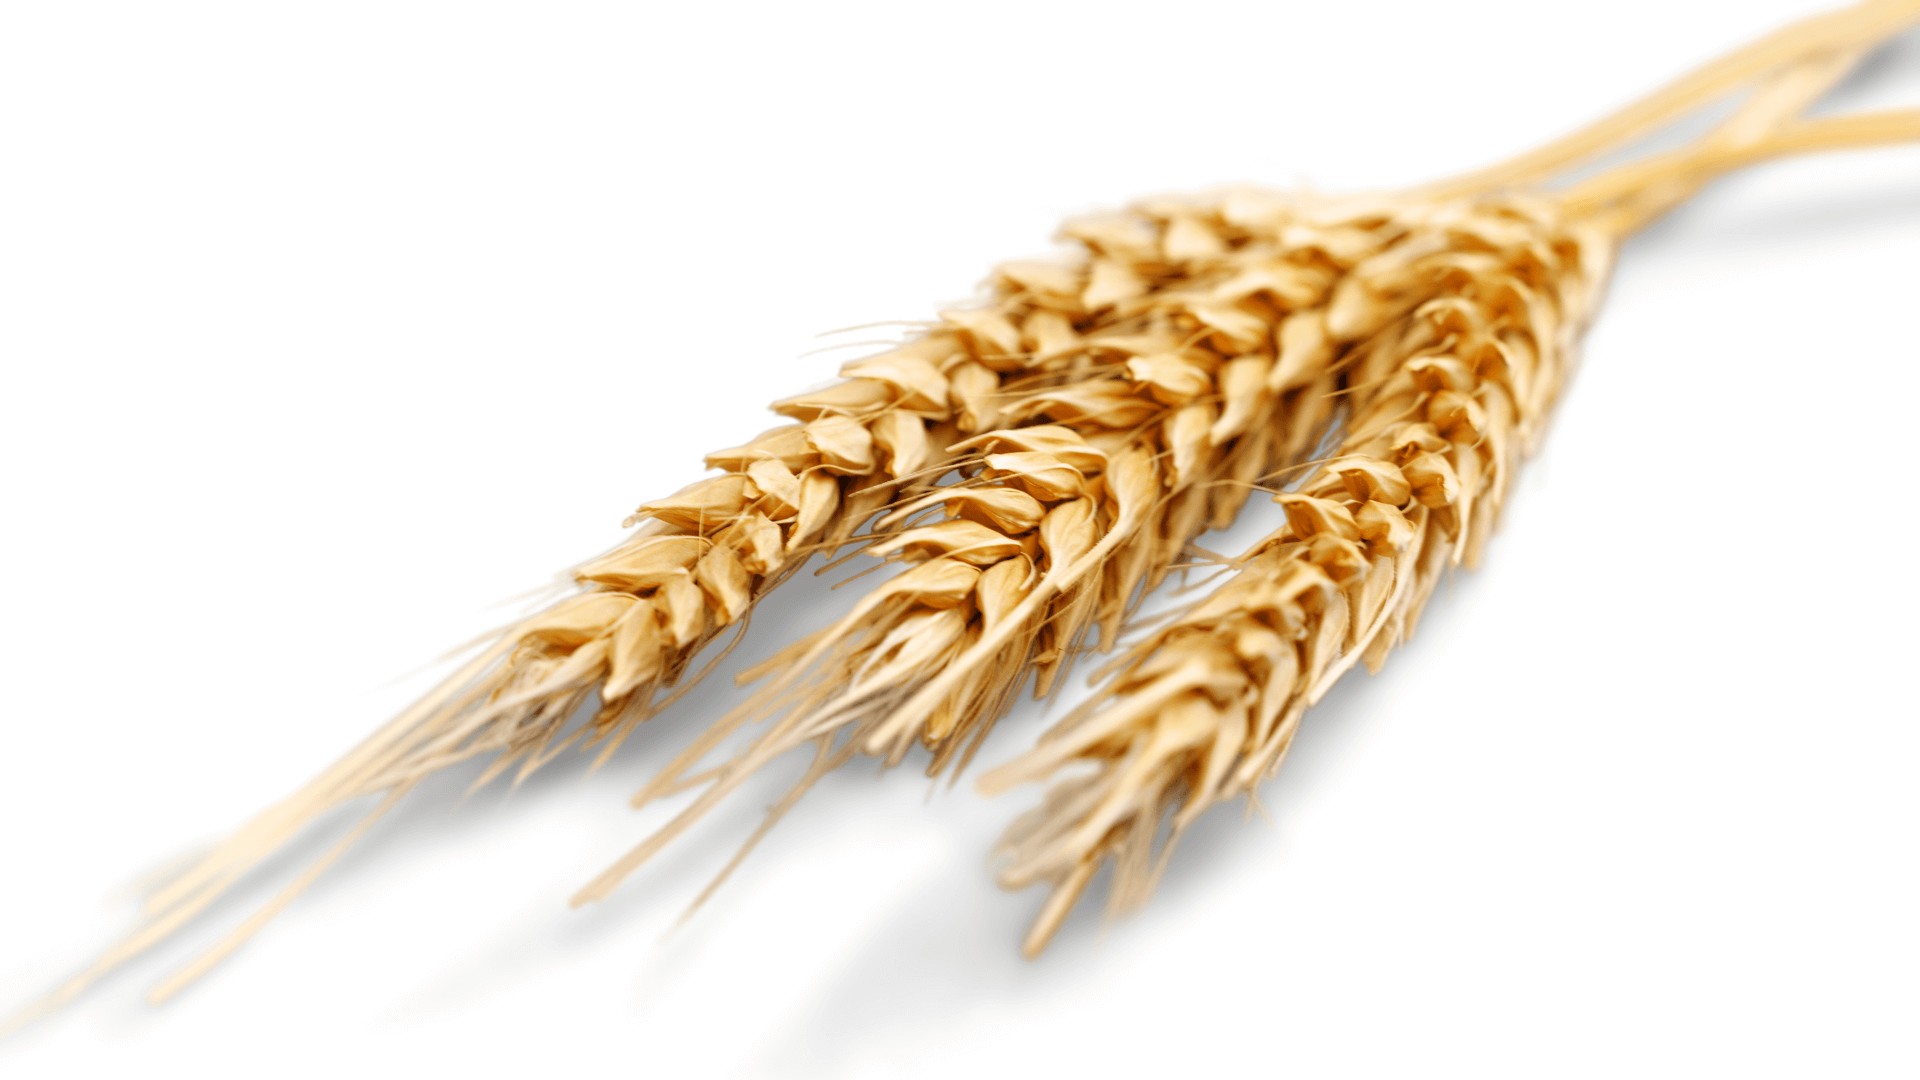 Altering your diet around a wheat allergy or intolerance